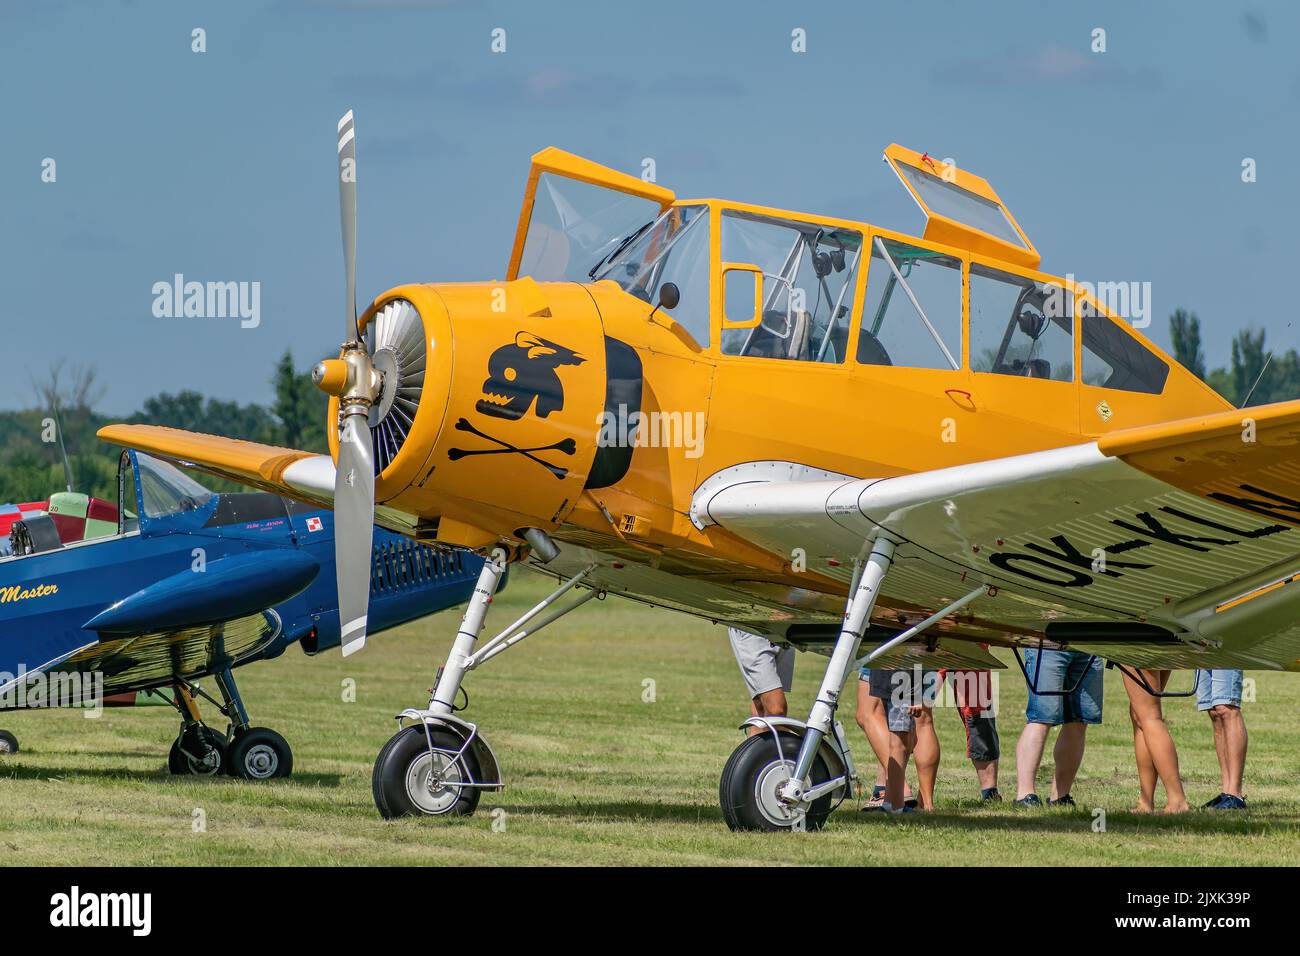 An agricultural aircraft Zlin Z-37A-2 Bumblebee parked on a field Stock Photo